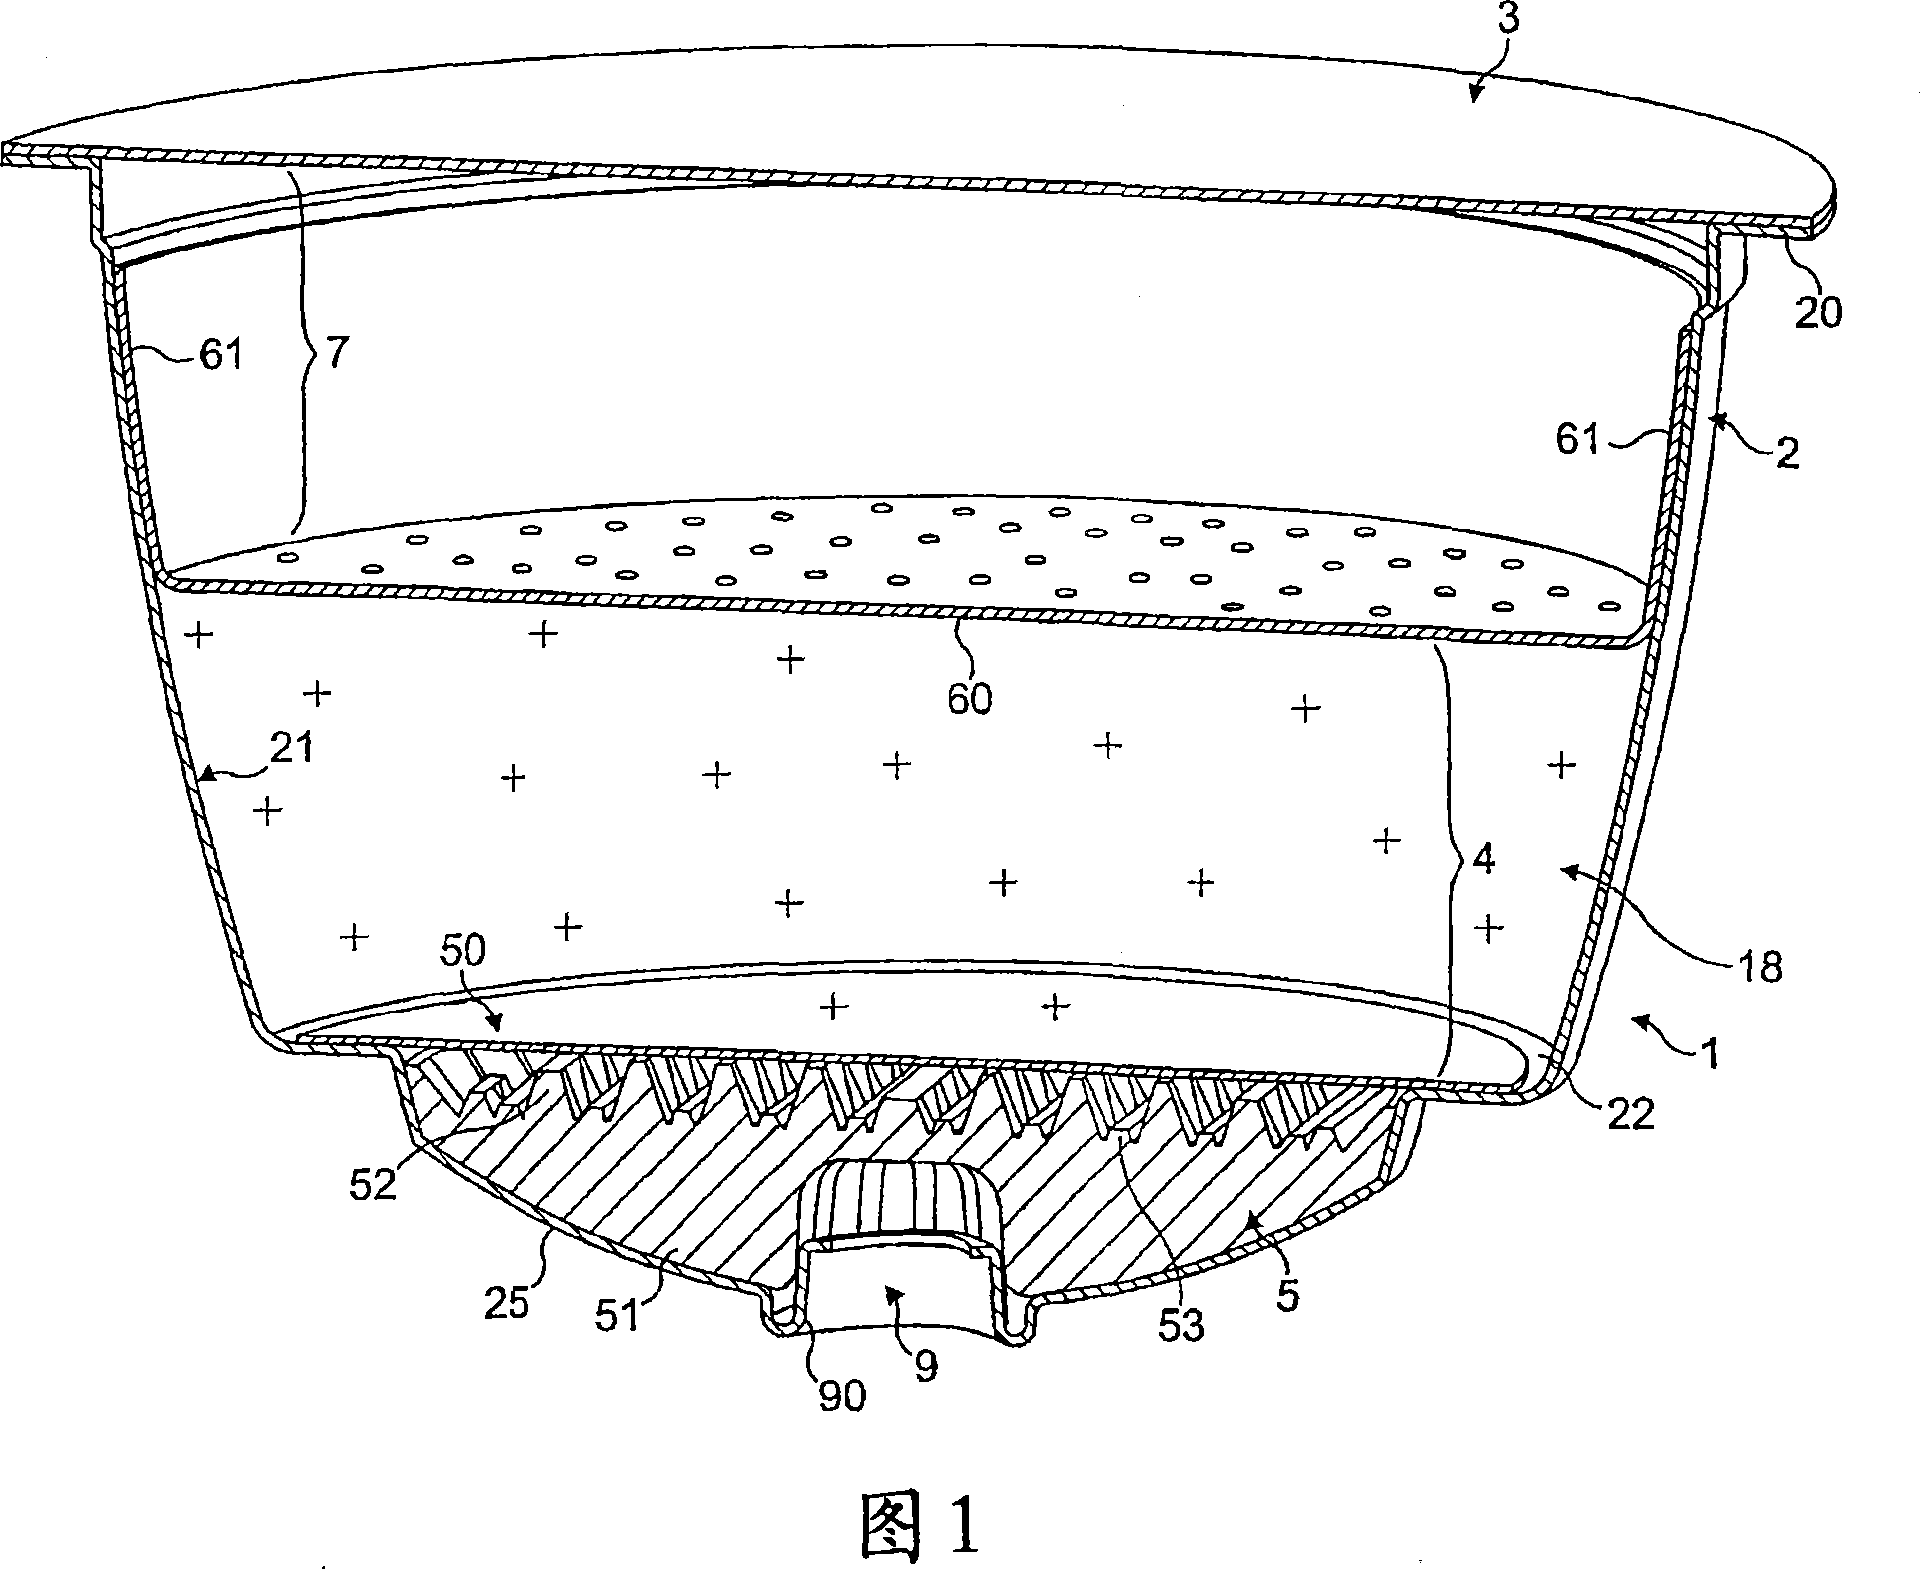 Capsule for preparing and delivering a drink by injecting a pressurized fluid into the capsule